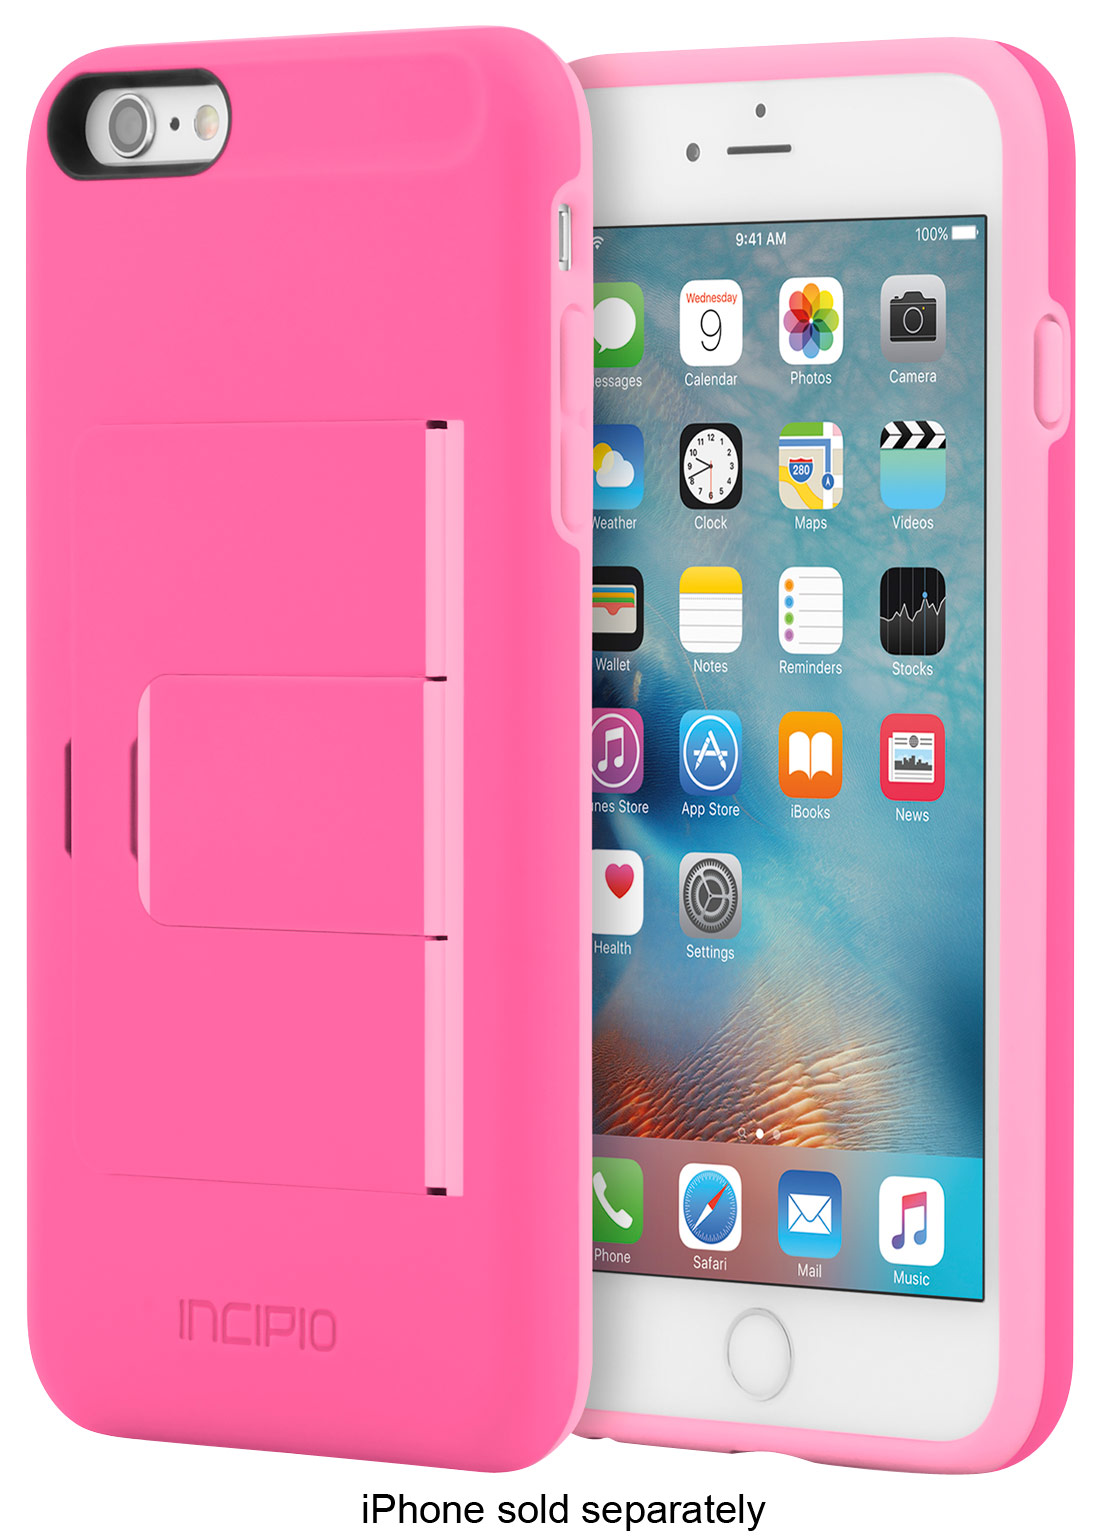 STOWAWAY Advance Wallet Case Apple® iPhone® 6 Plus and iPhone 6s Plus Pink/Light Pink IPH-1201-PNK Best Buy